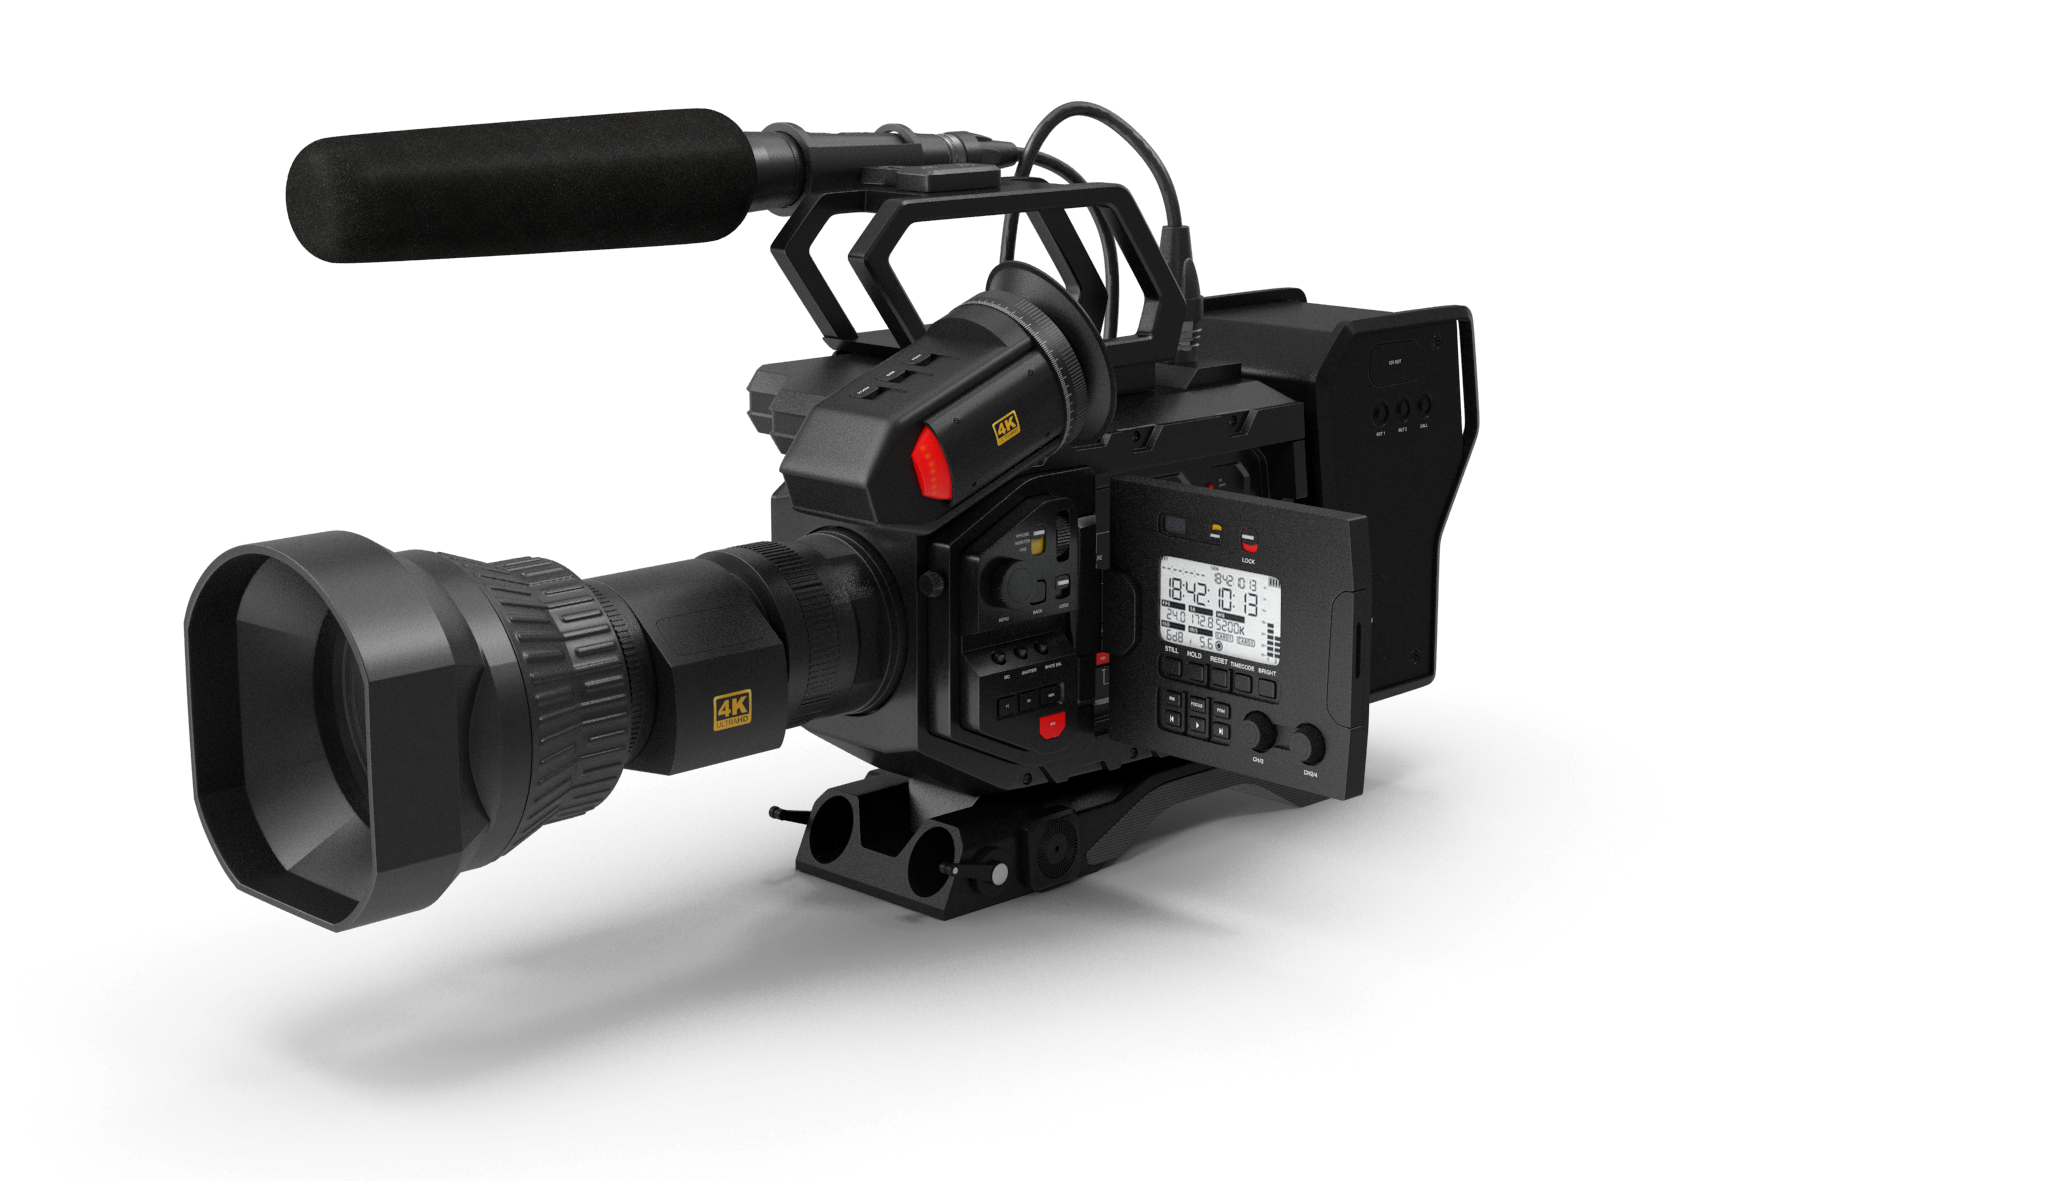 Professional Studio Camera 4K to 12K high resolution with lense attachements for a production studio in miami